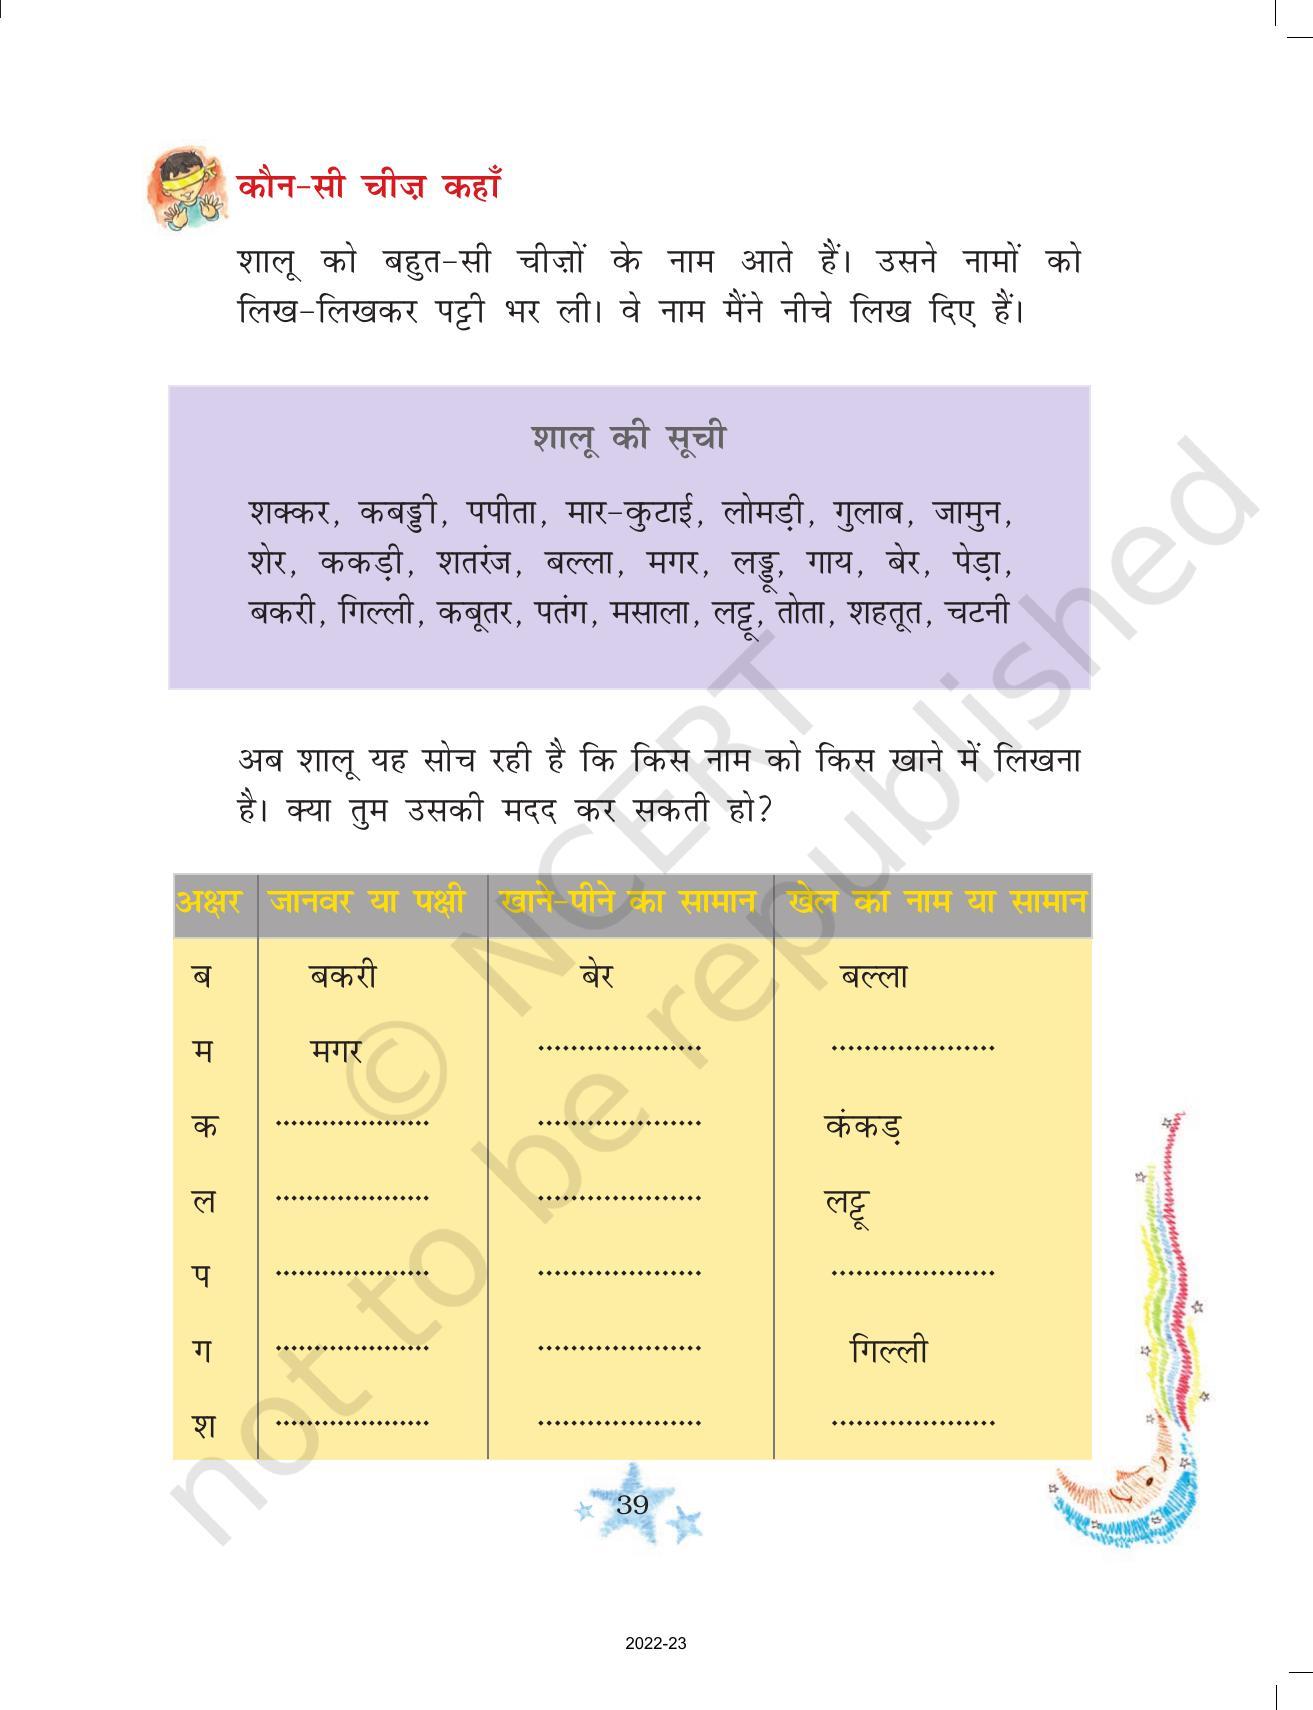 NCERT Book for Class 3 Hindi Chapter 5-हमसे सब कहते - Page 4